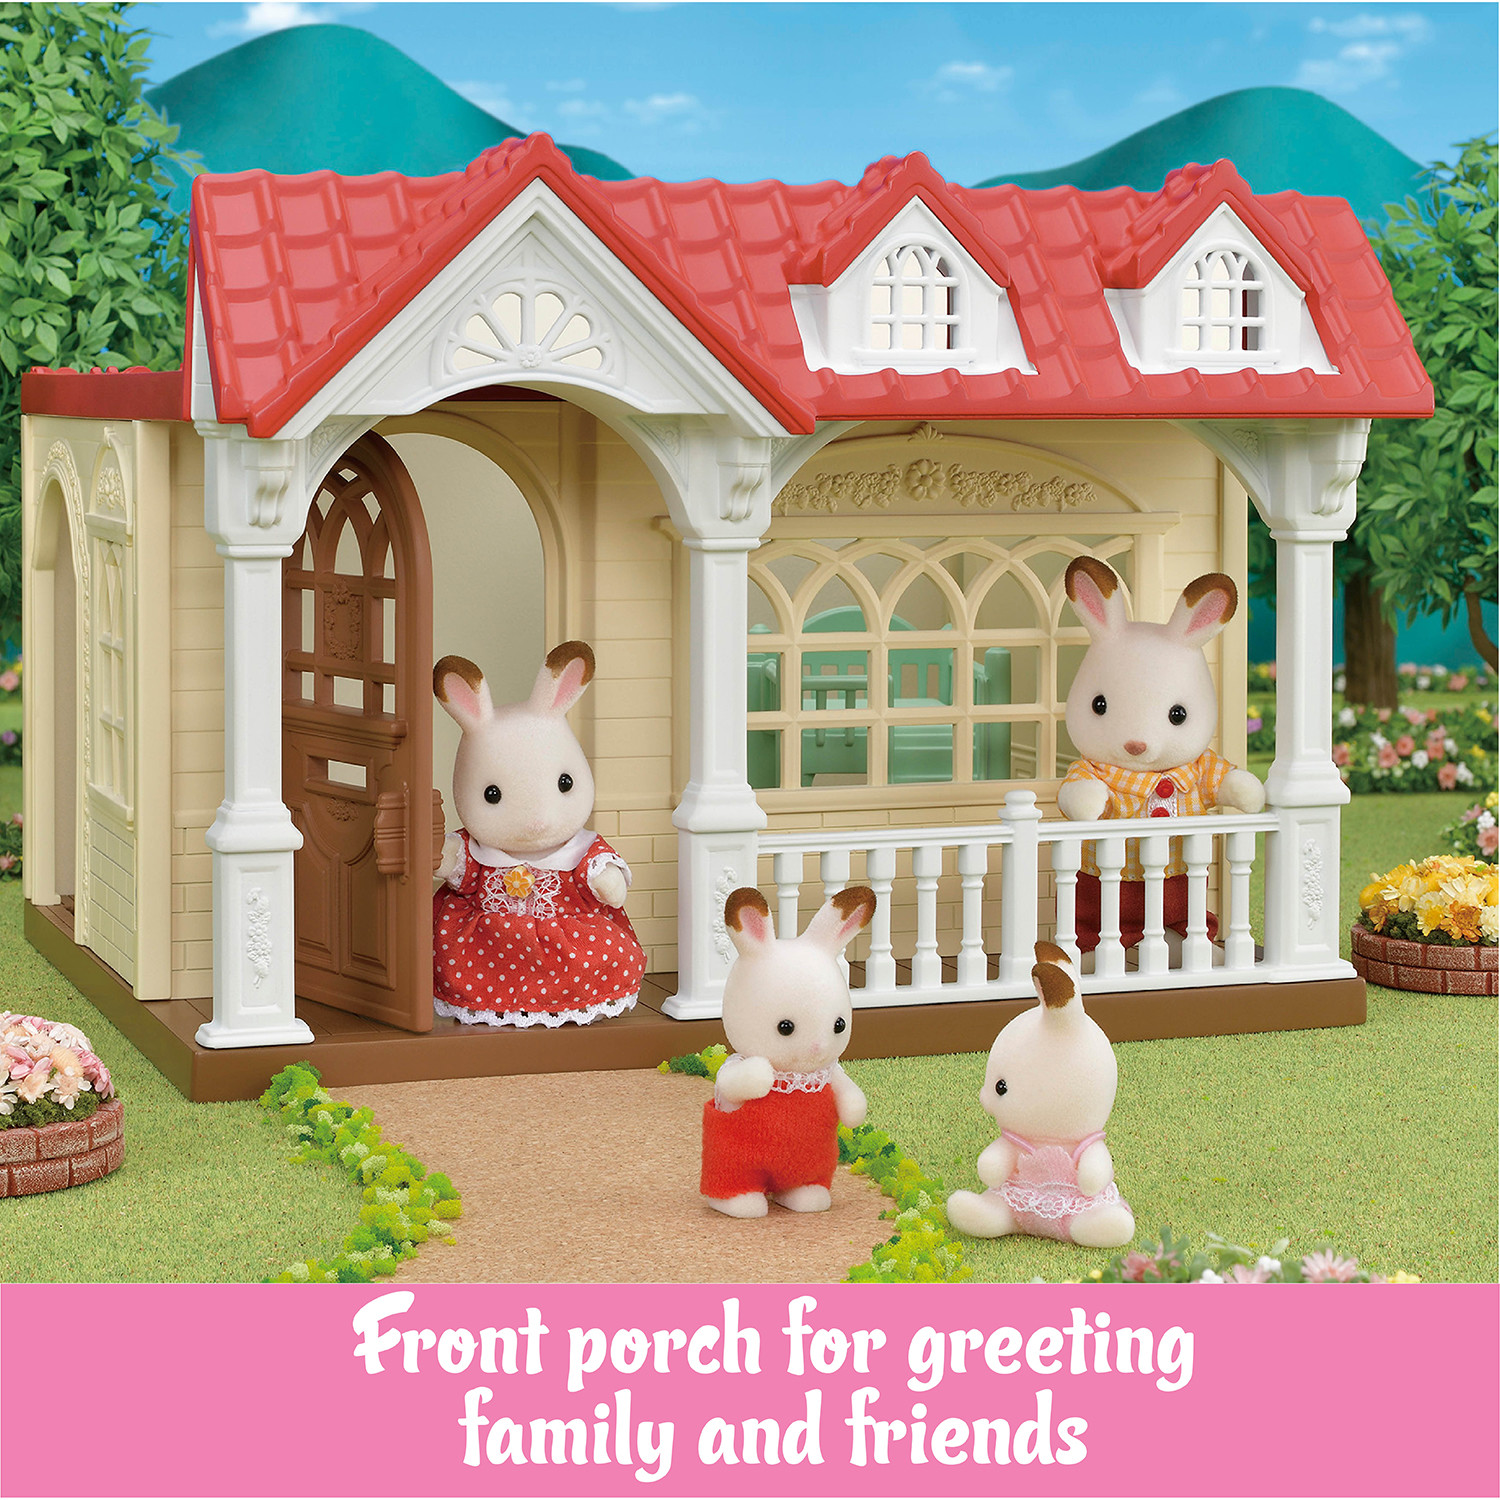 Calico Critters Sweet Raspberry Home, Dollhouse Playset with Figure and Furniture - image 4 of 8